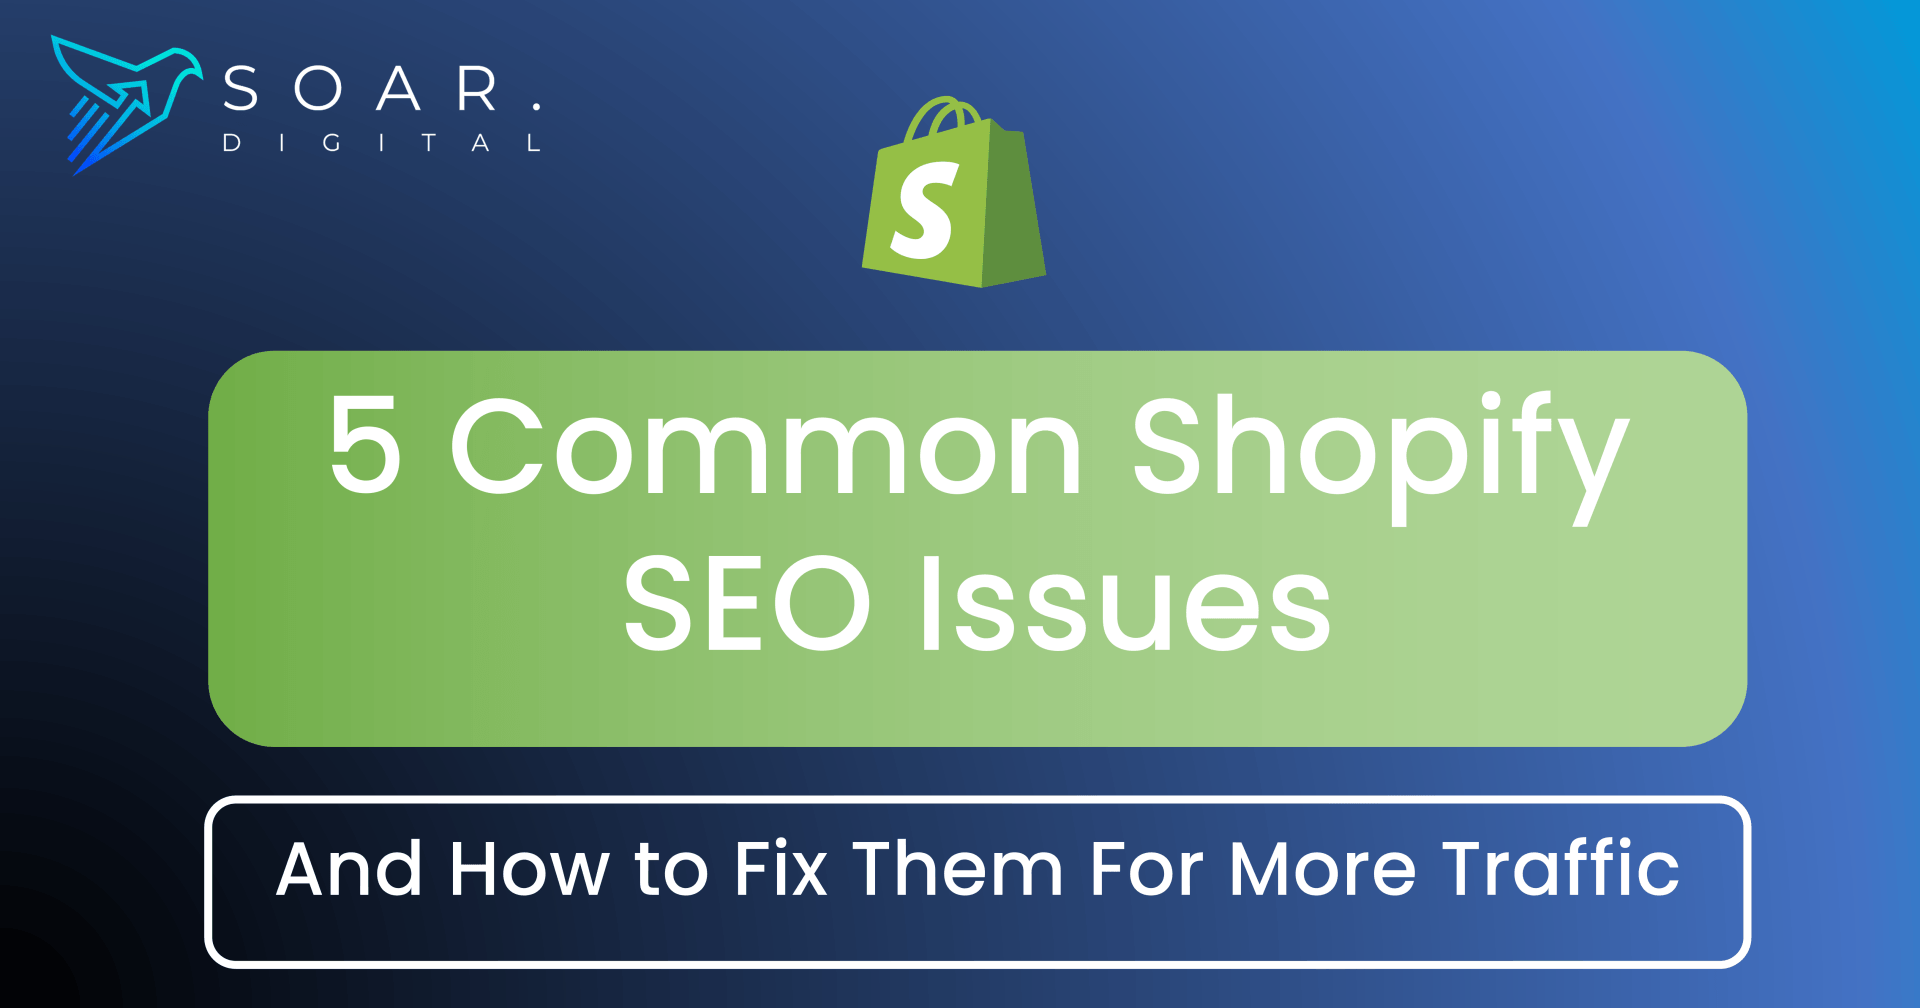 shopify problems with seo and steps to resolve them